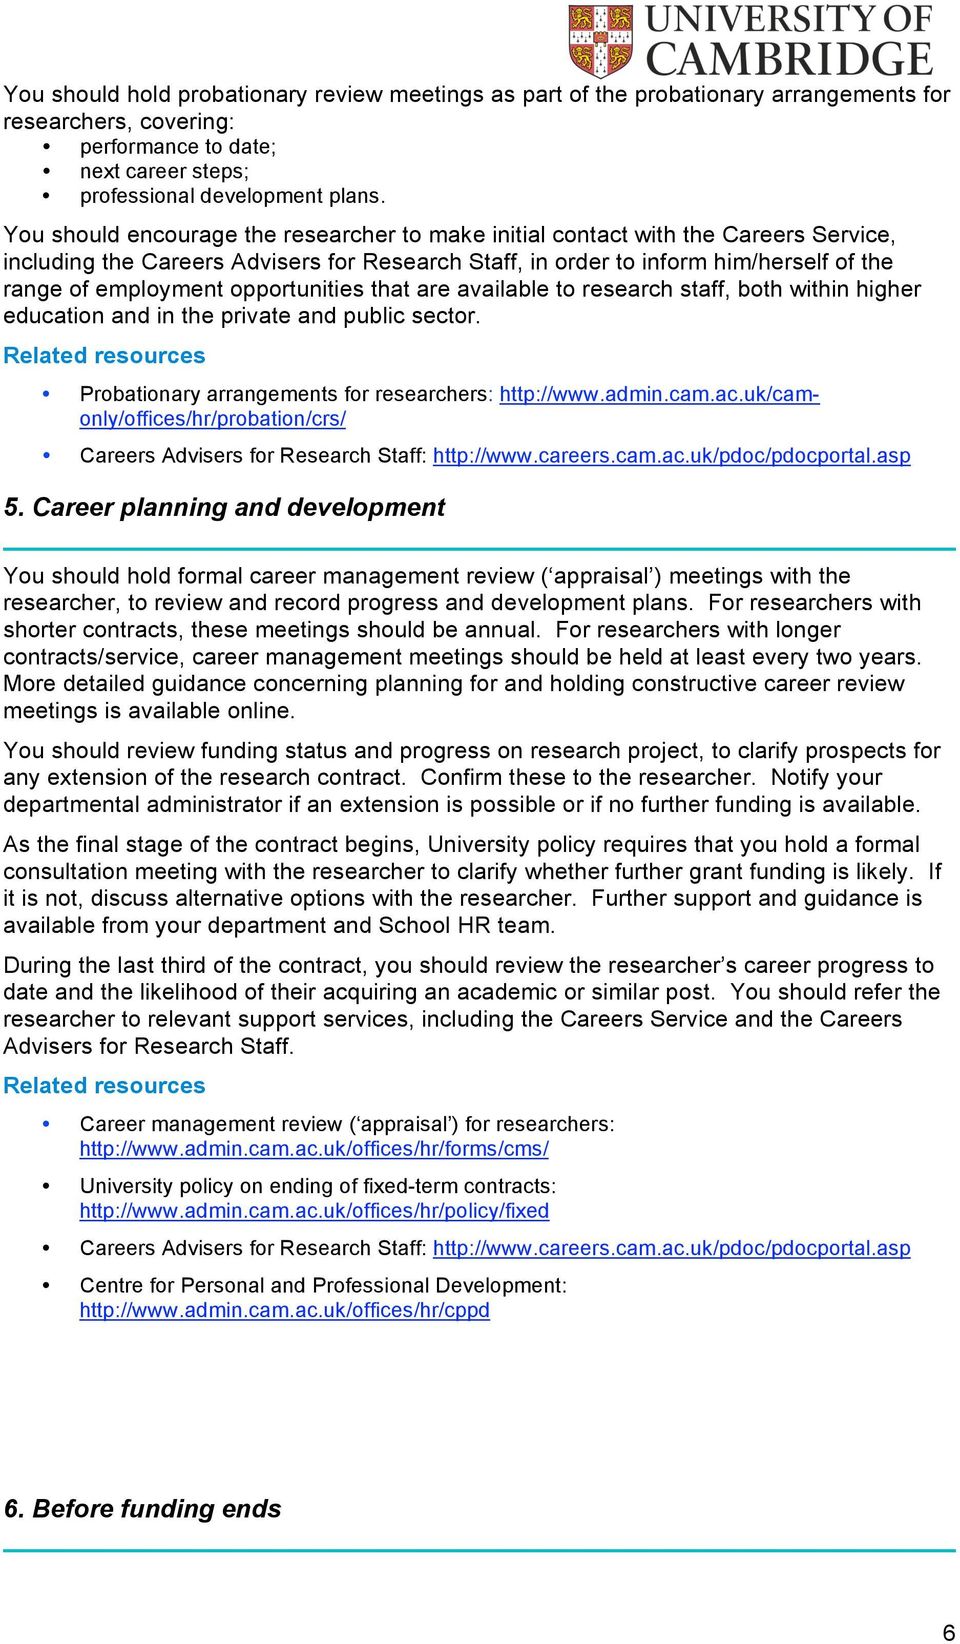 opportunities that are available to research staff, both within higher education and in the private and public sector. Probationary arrangements for researchers: http://www.admin.cam.ac.